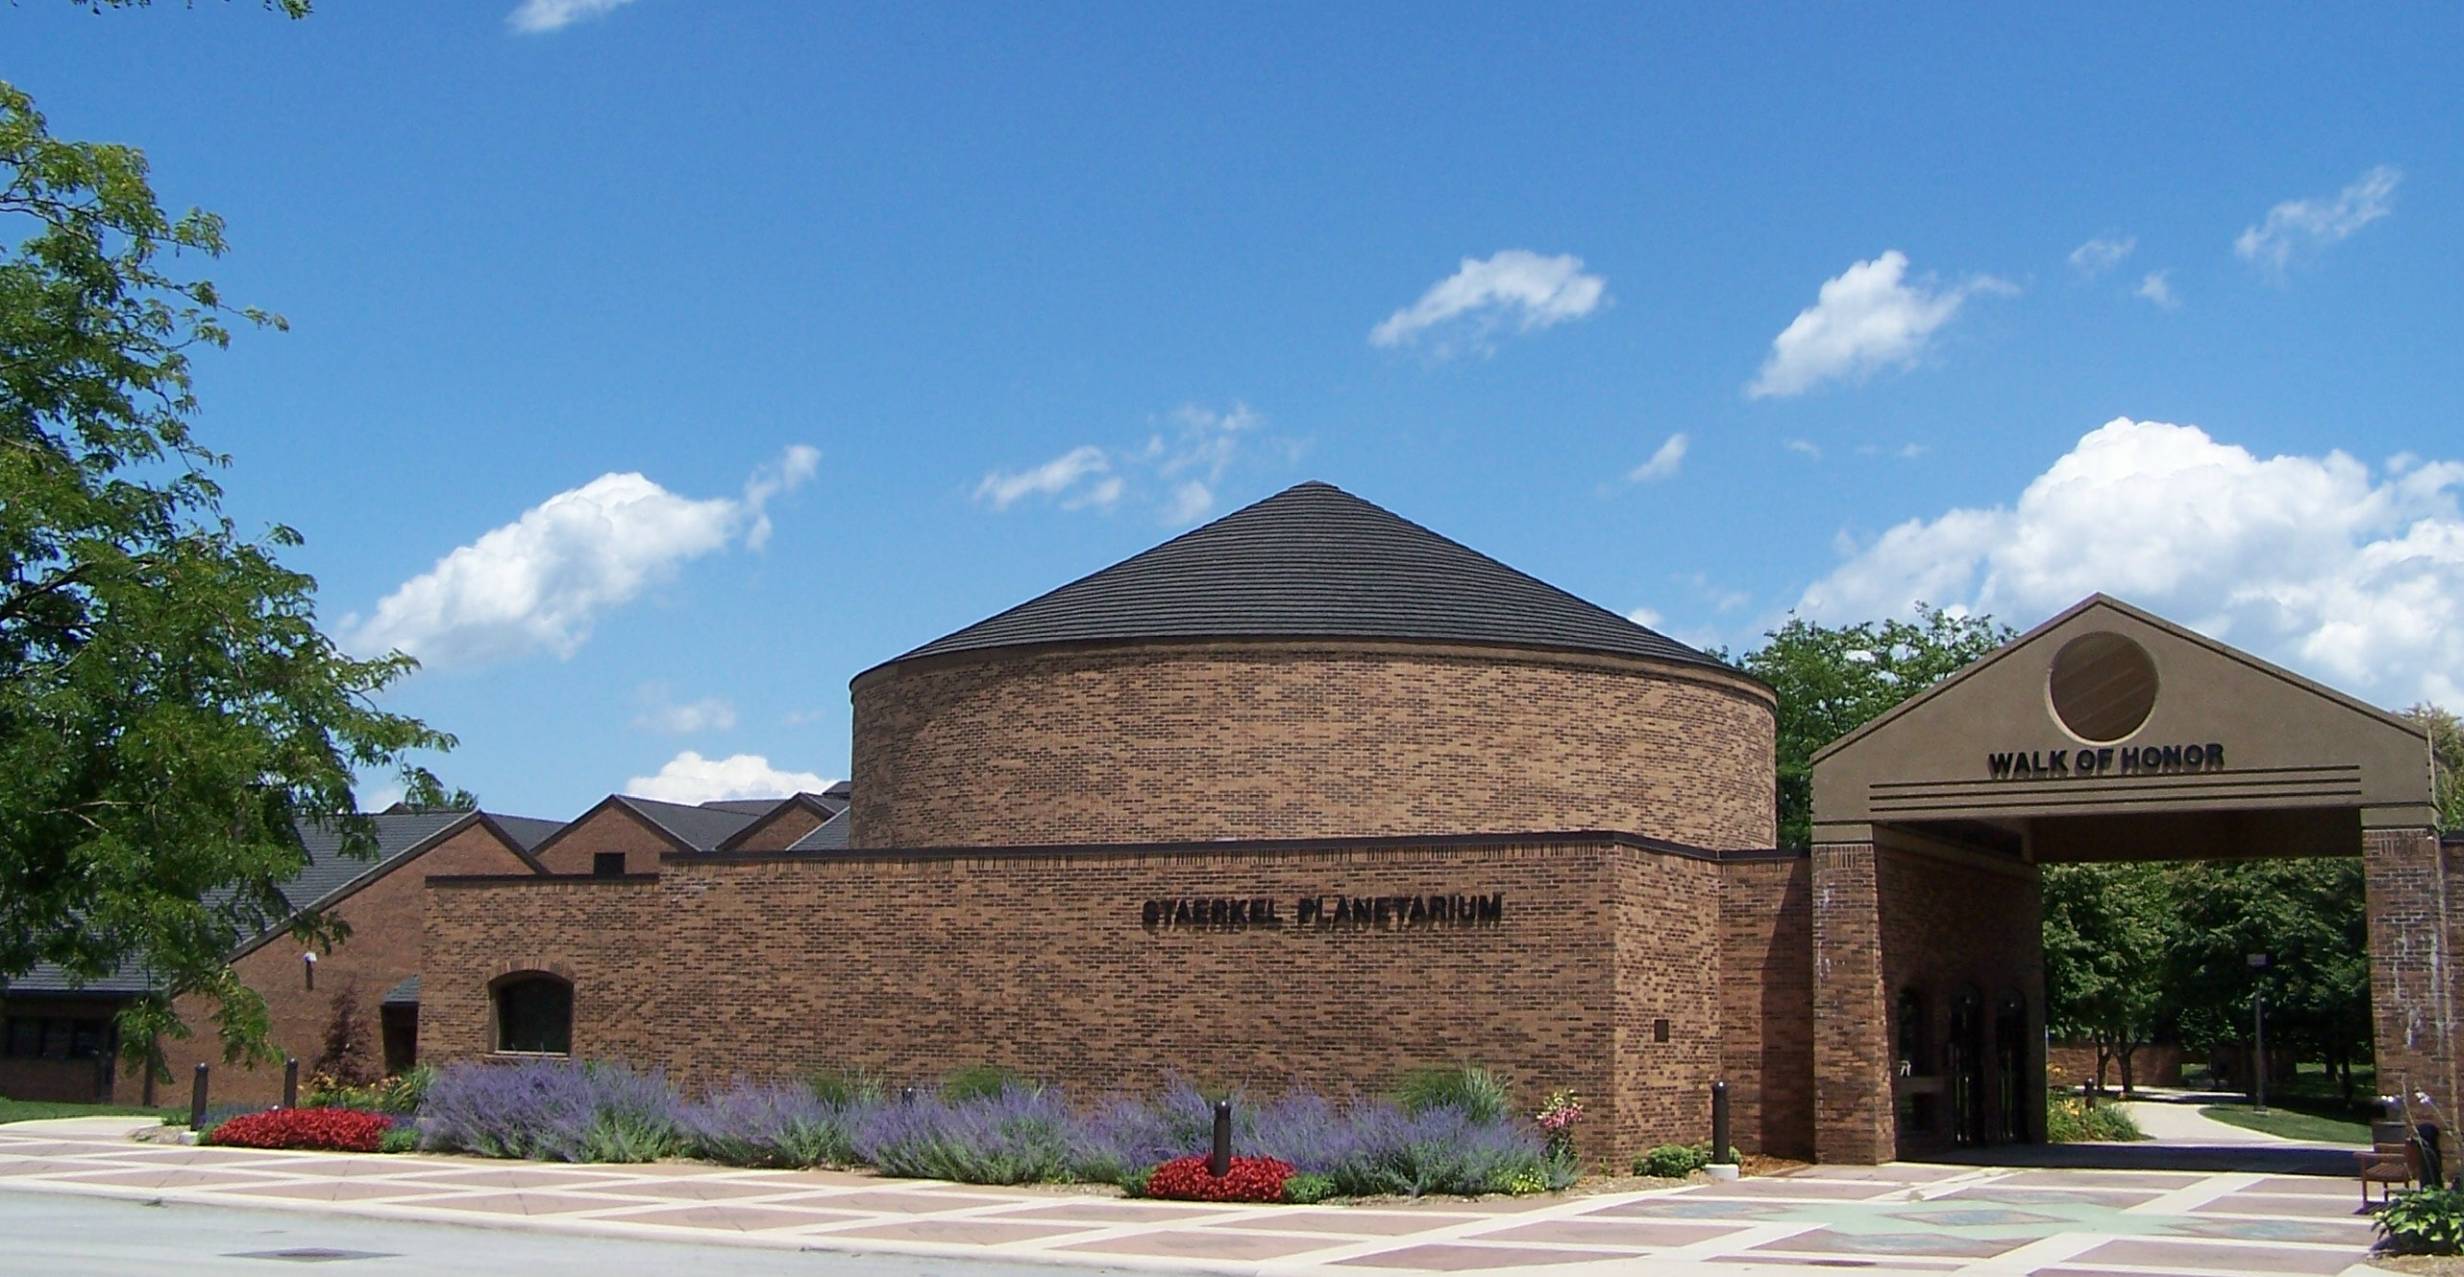 Exterior view of the Staerkel Planetarium at Parkland College. It's a brick building with a pitched dome roof.